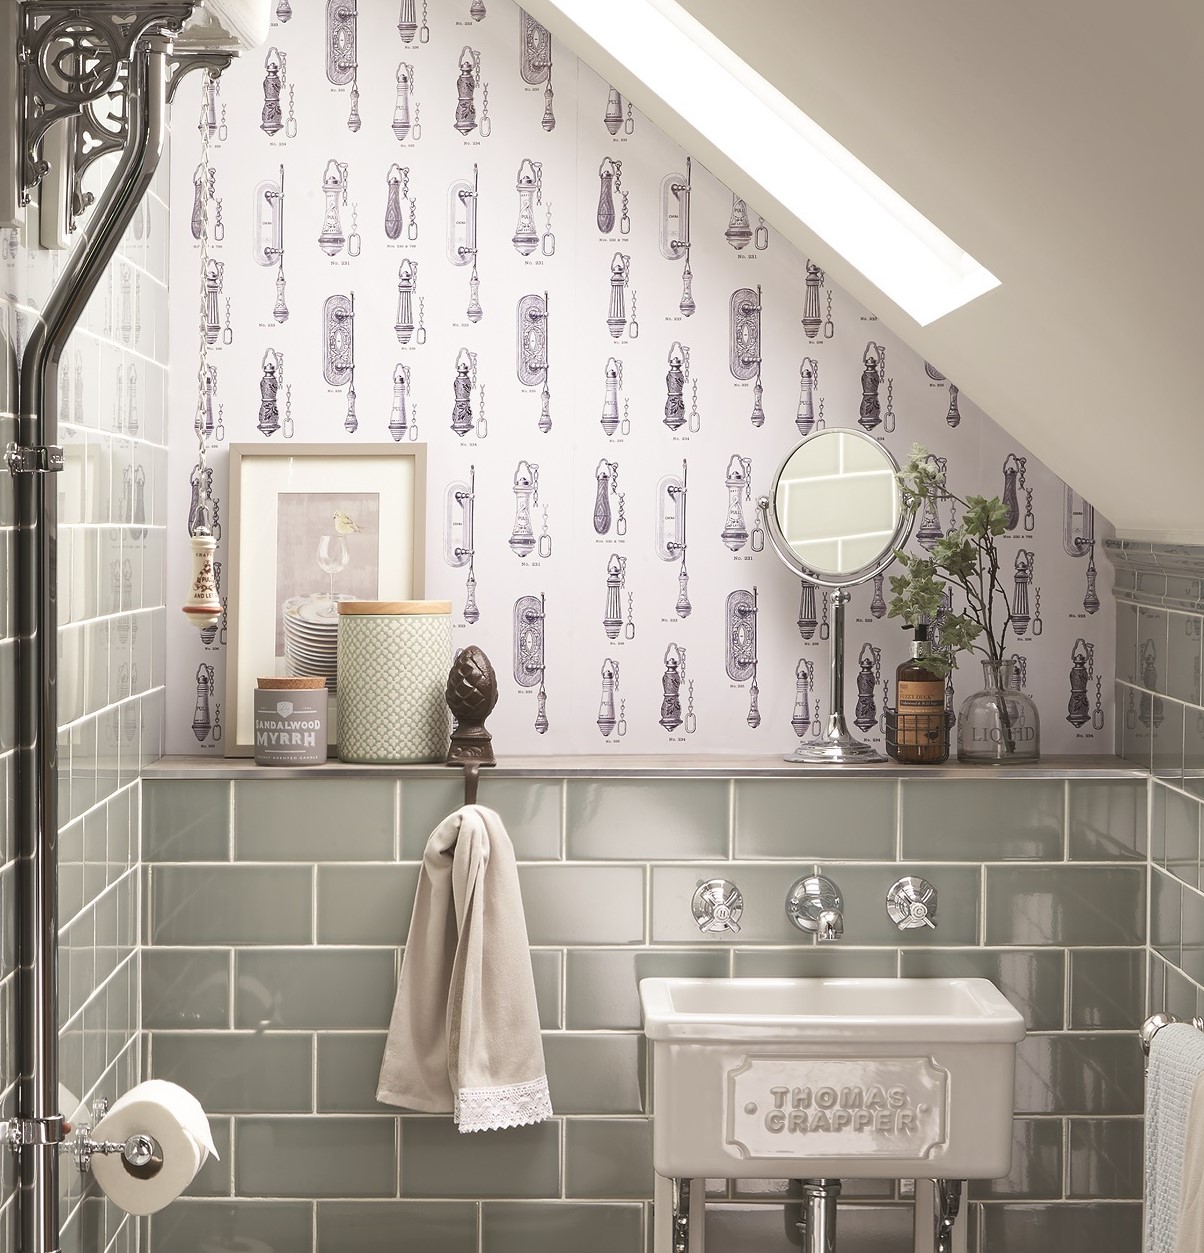 Thomas Crapper Cistern Pull Wallpaper Available to Buy Online at UKAA. Traditional Bathroom Wallpaper